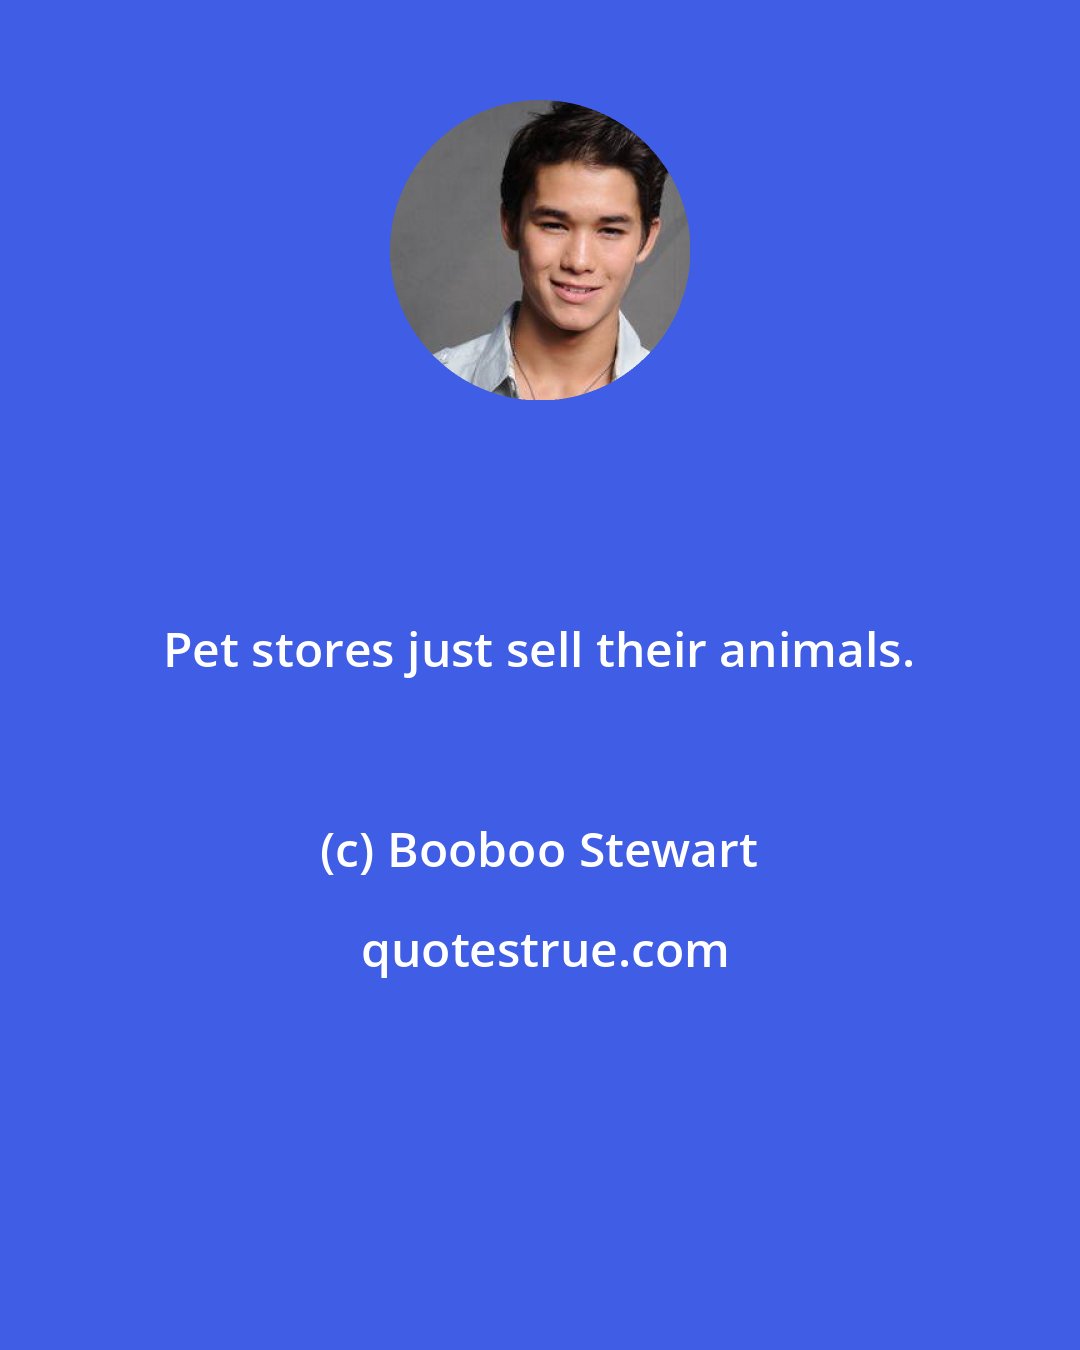 Booboo Stewart: Pet stores just sell their animals.